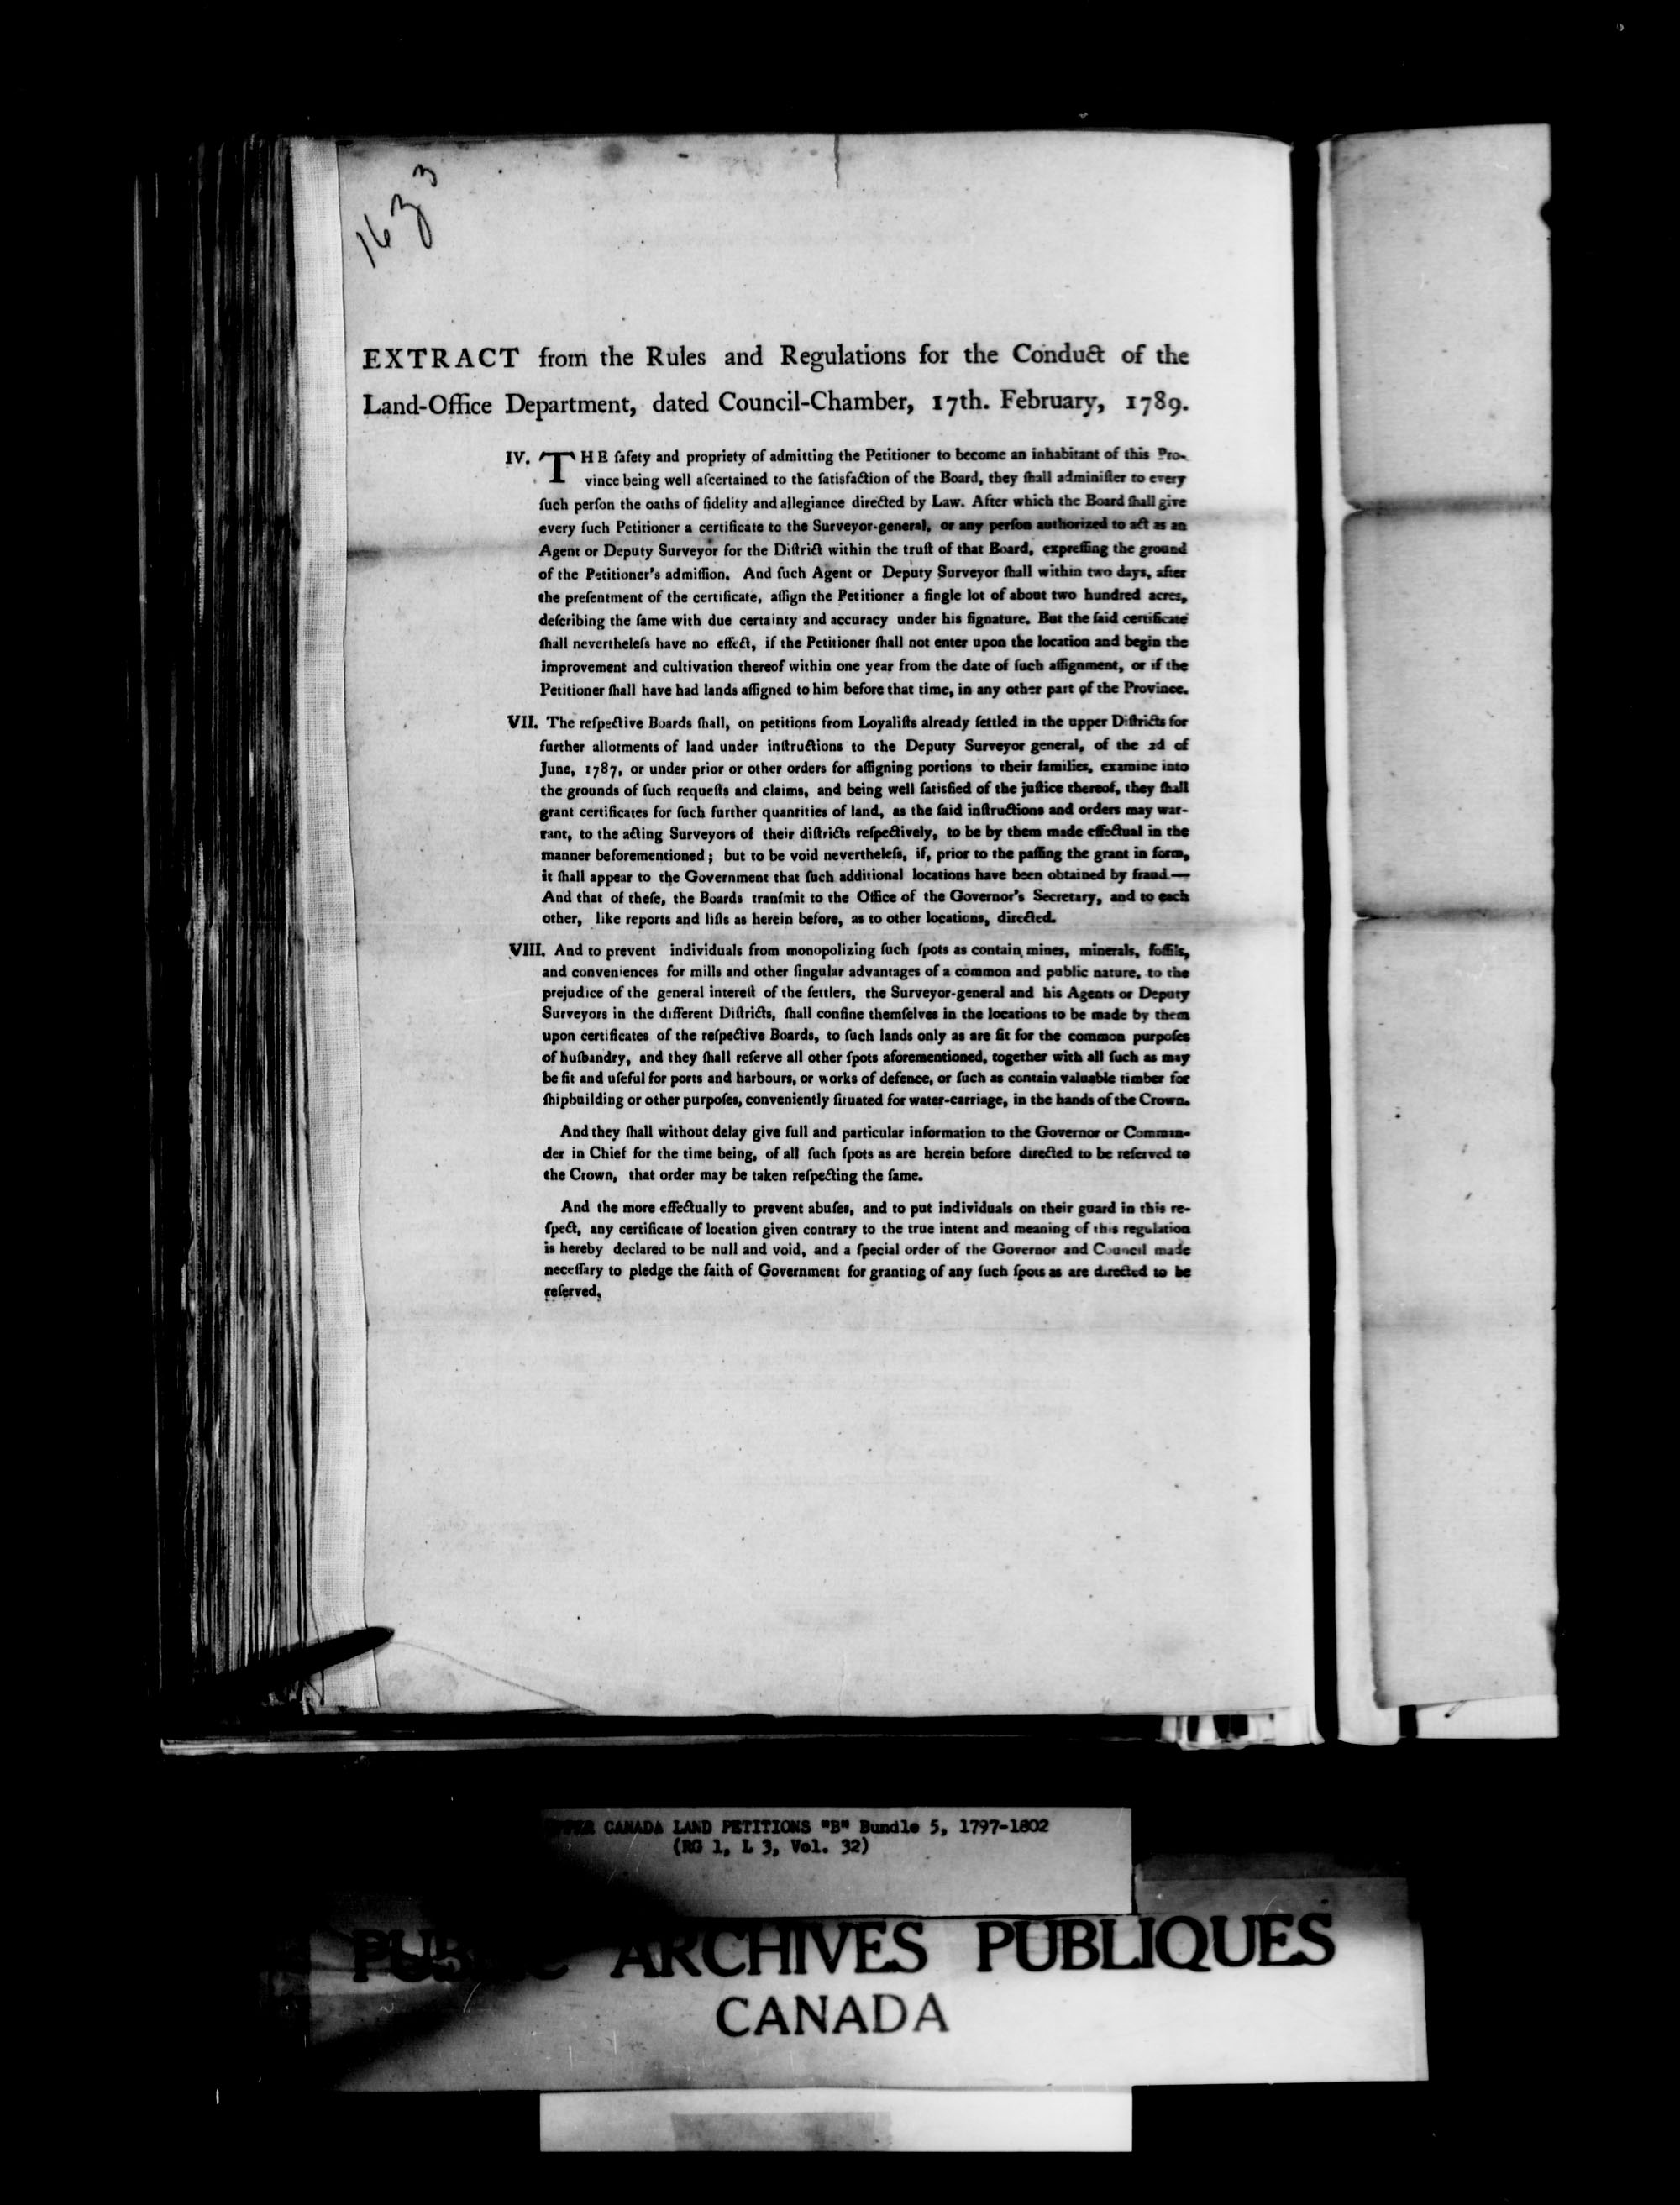 Title: Upper Canada Land Petitions (1763-1865) - Mikan Number: 205131 - Microform: c-1620